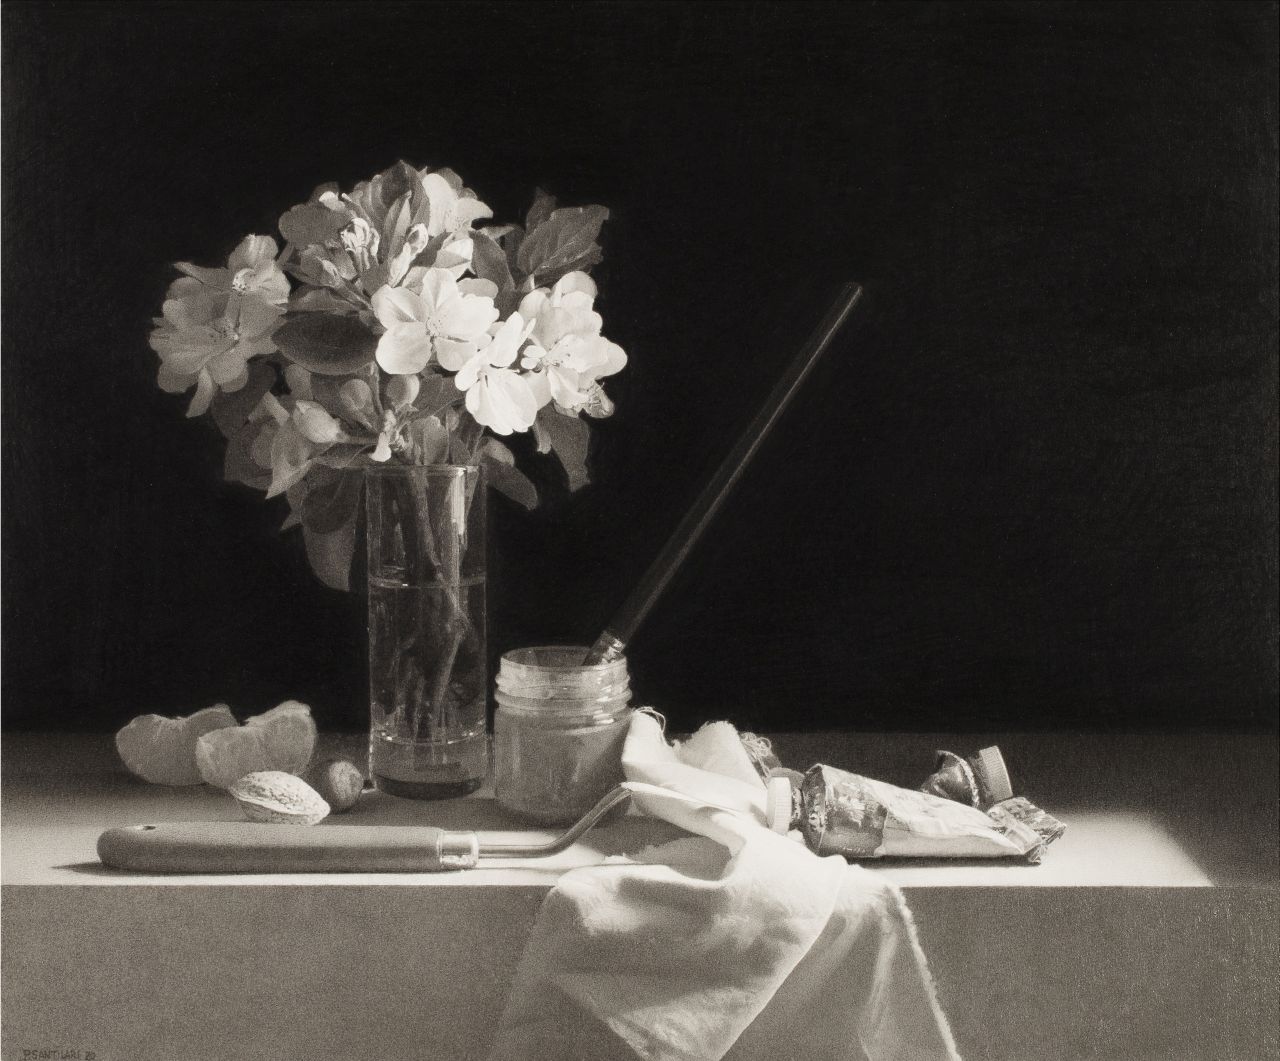 The painter of still lifes and flowers, Pere Santilari